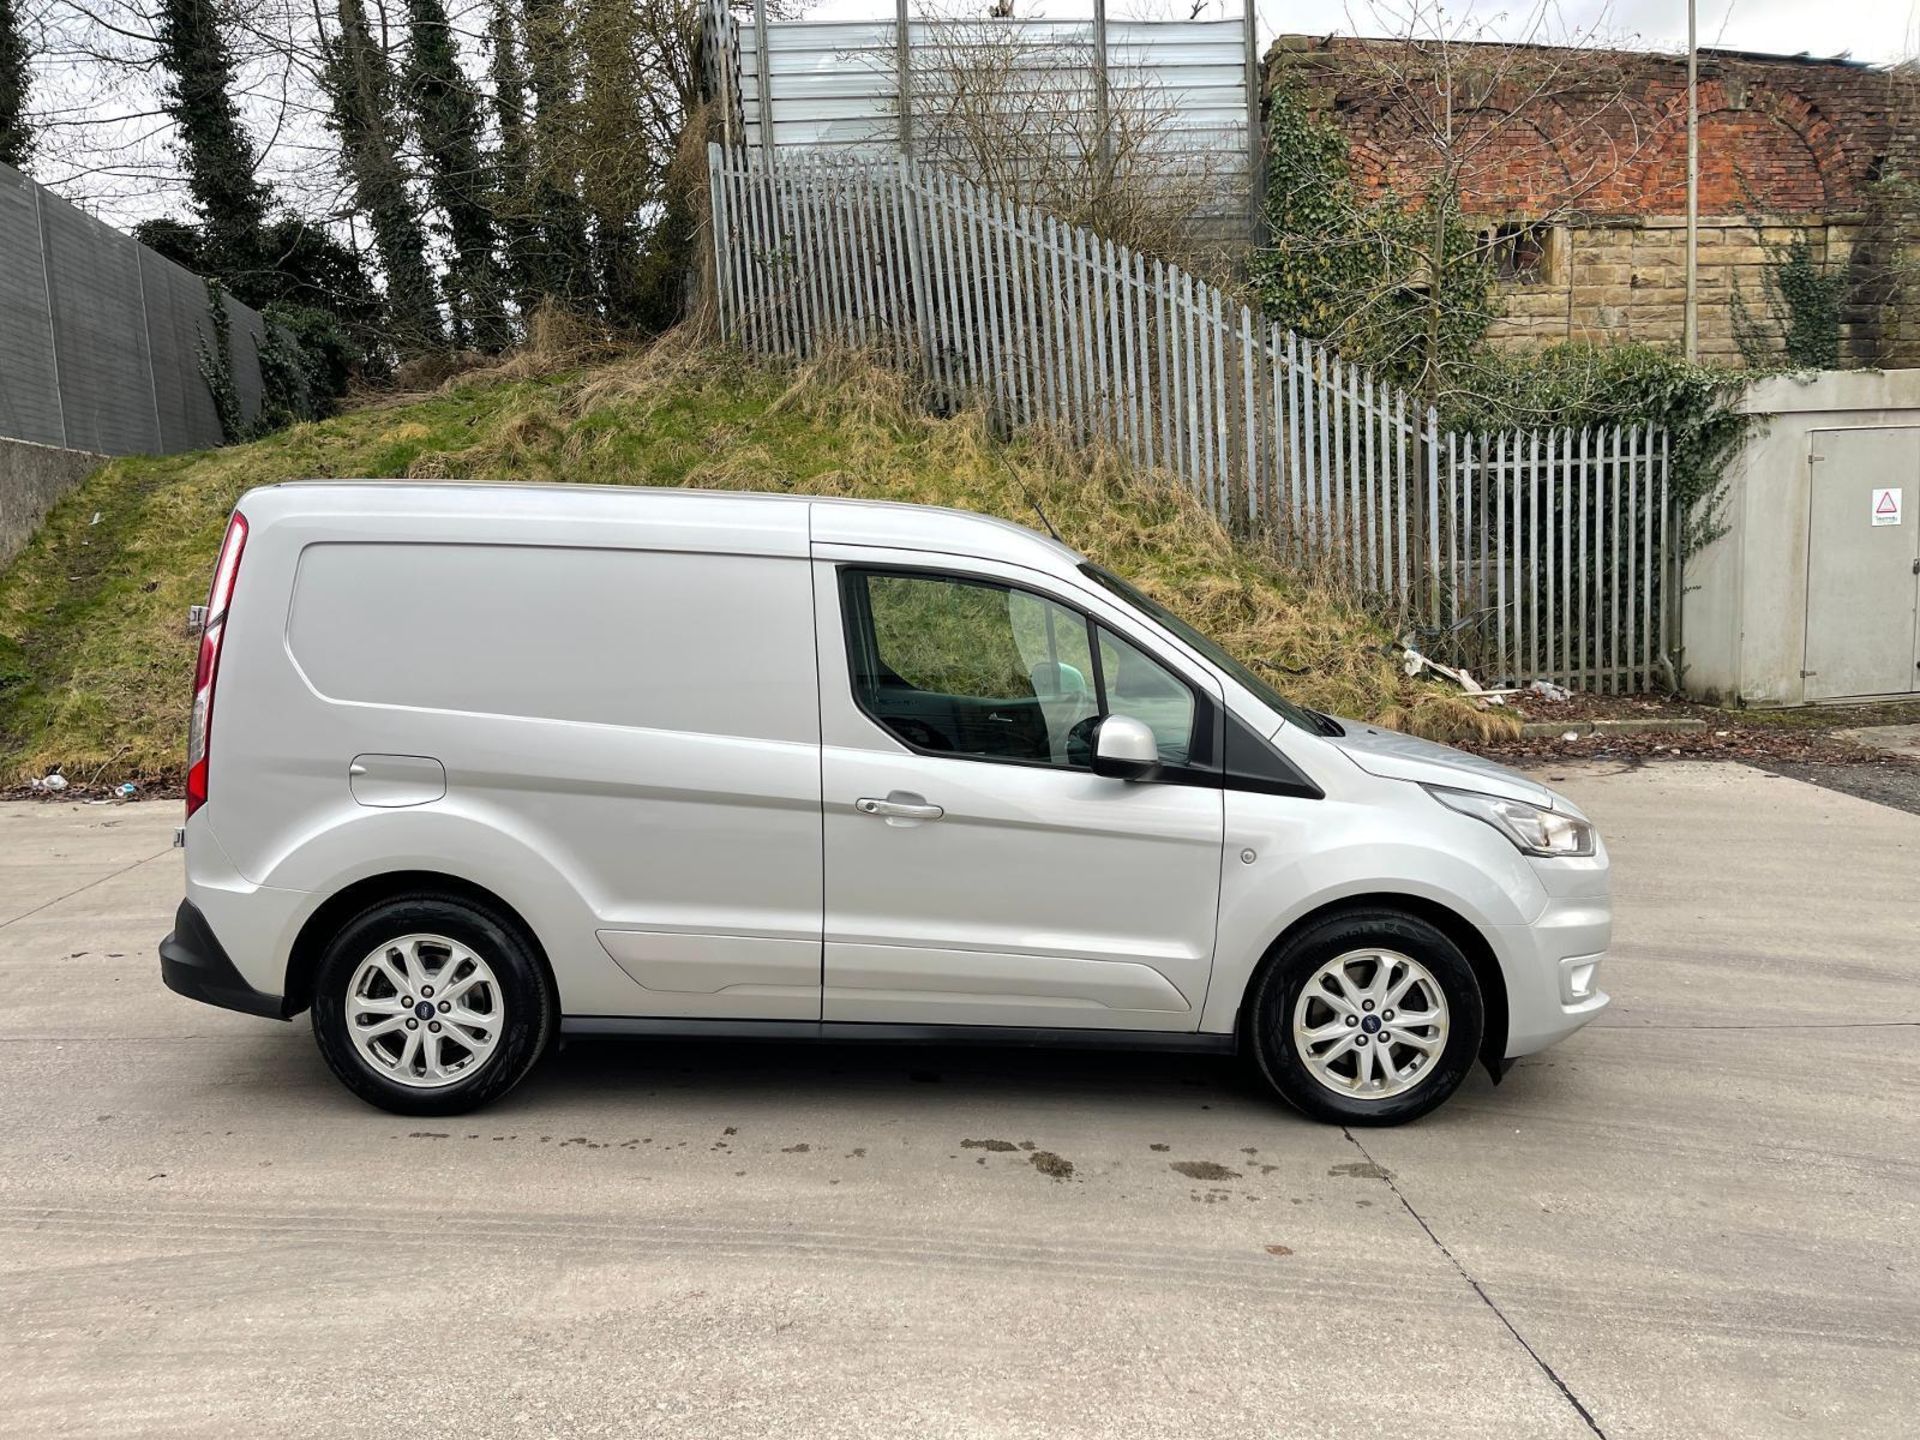 2019 FORD TRANSIT CONNECT LIMITED: POWERFUL 1.5 TDCI DIESEL